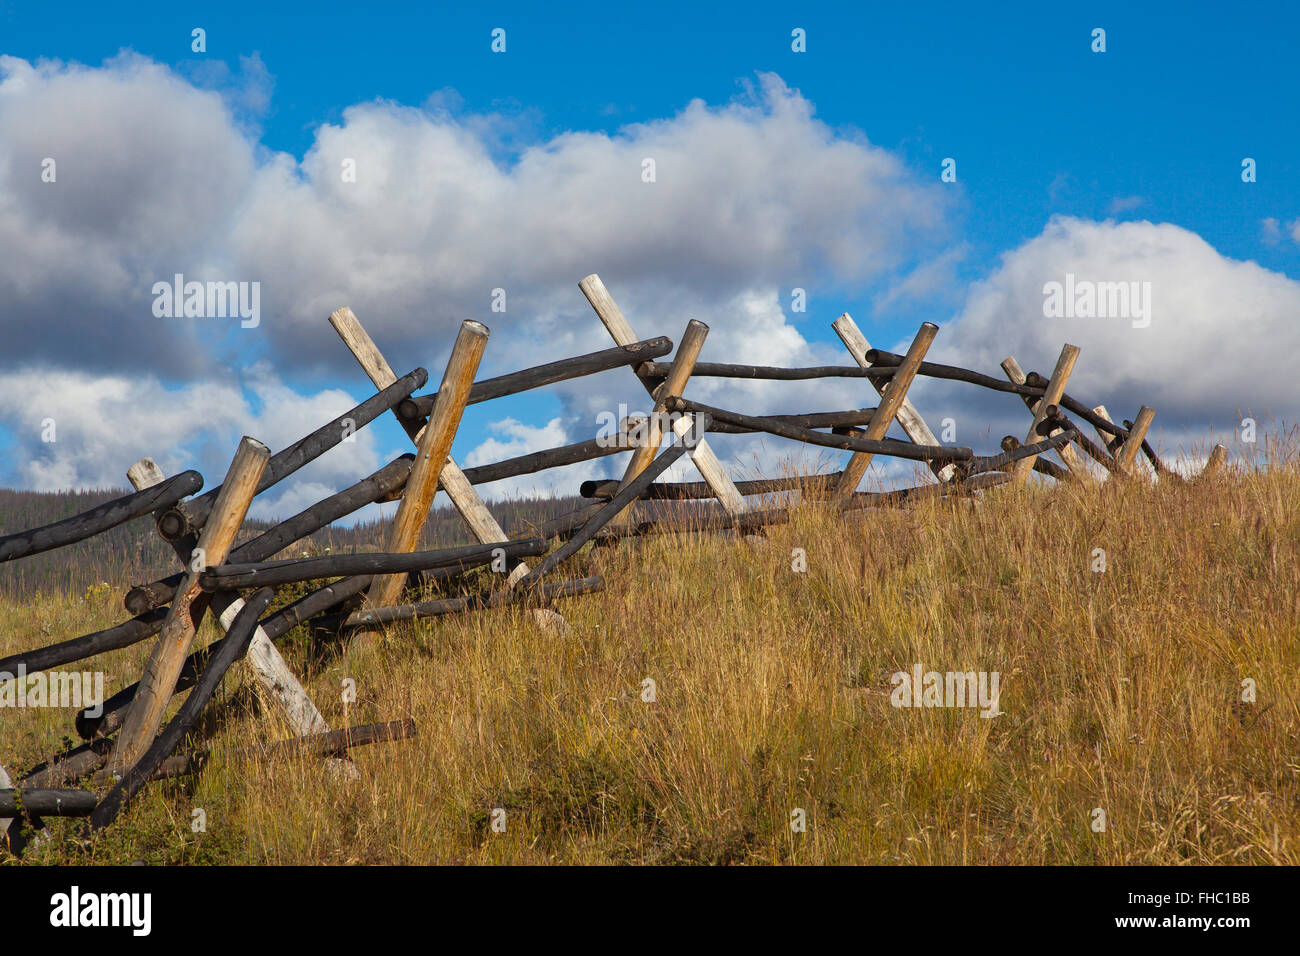 A snow fence near North Creek Gorge in the SAN JUAN MOUNTAINS of SOUTHERN COLORADO Stock Photo